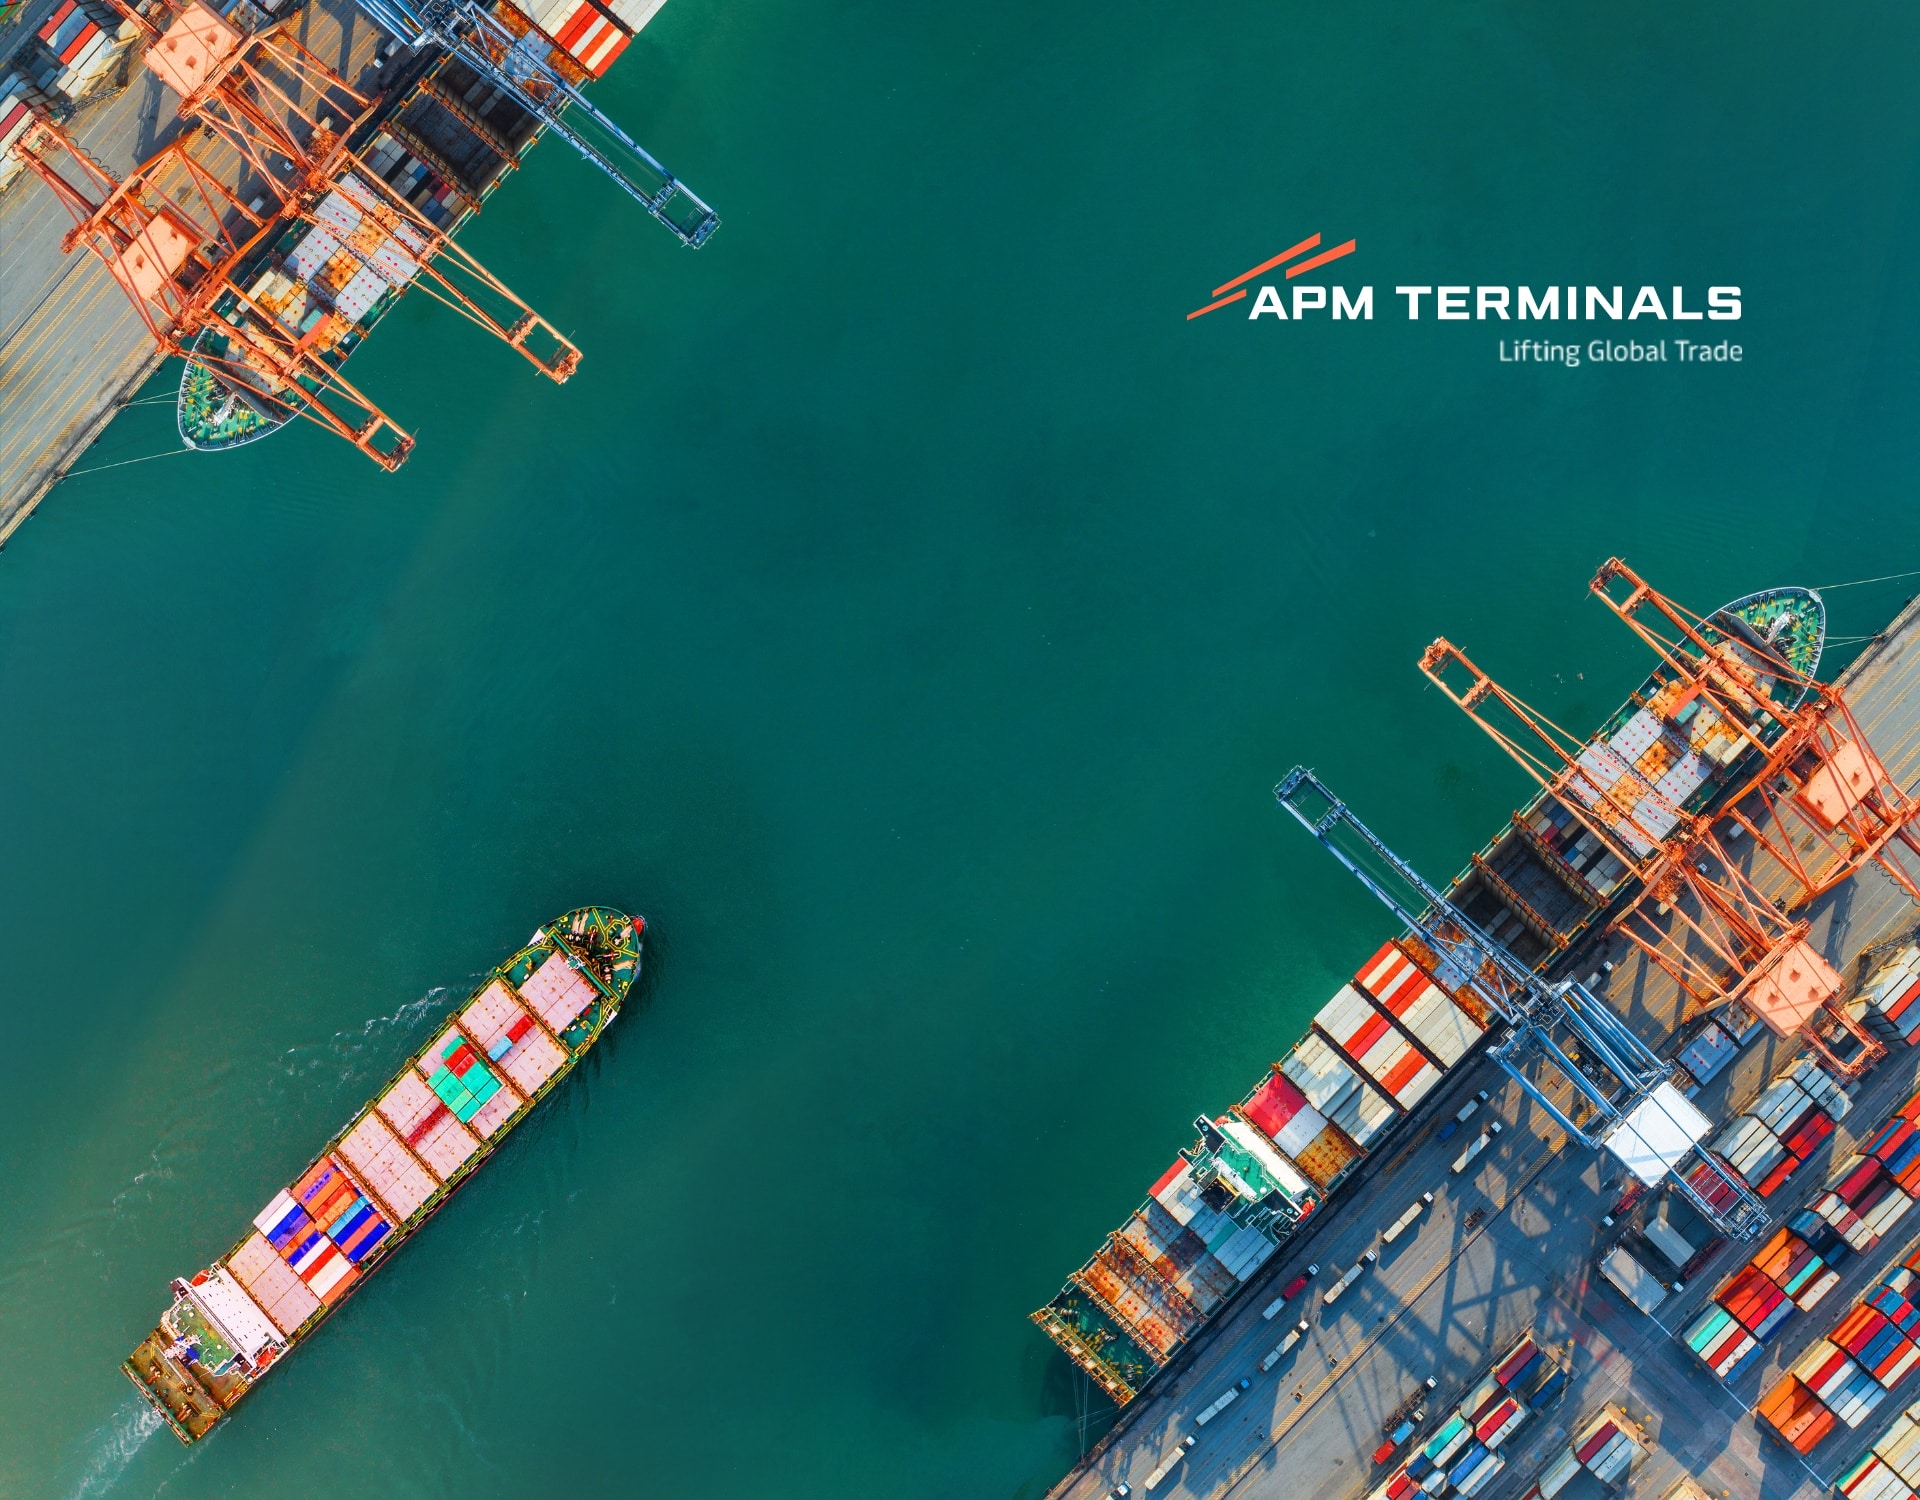 Unearthing Change Agents to Propel the Sustainability Agenda Through Digitalization Initiatives at APM Terminals